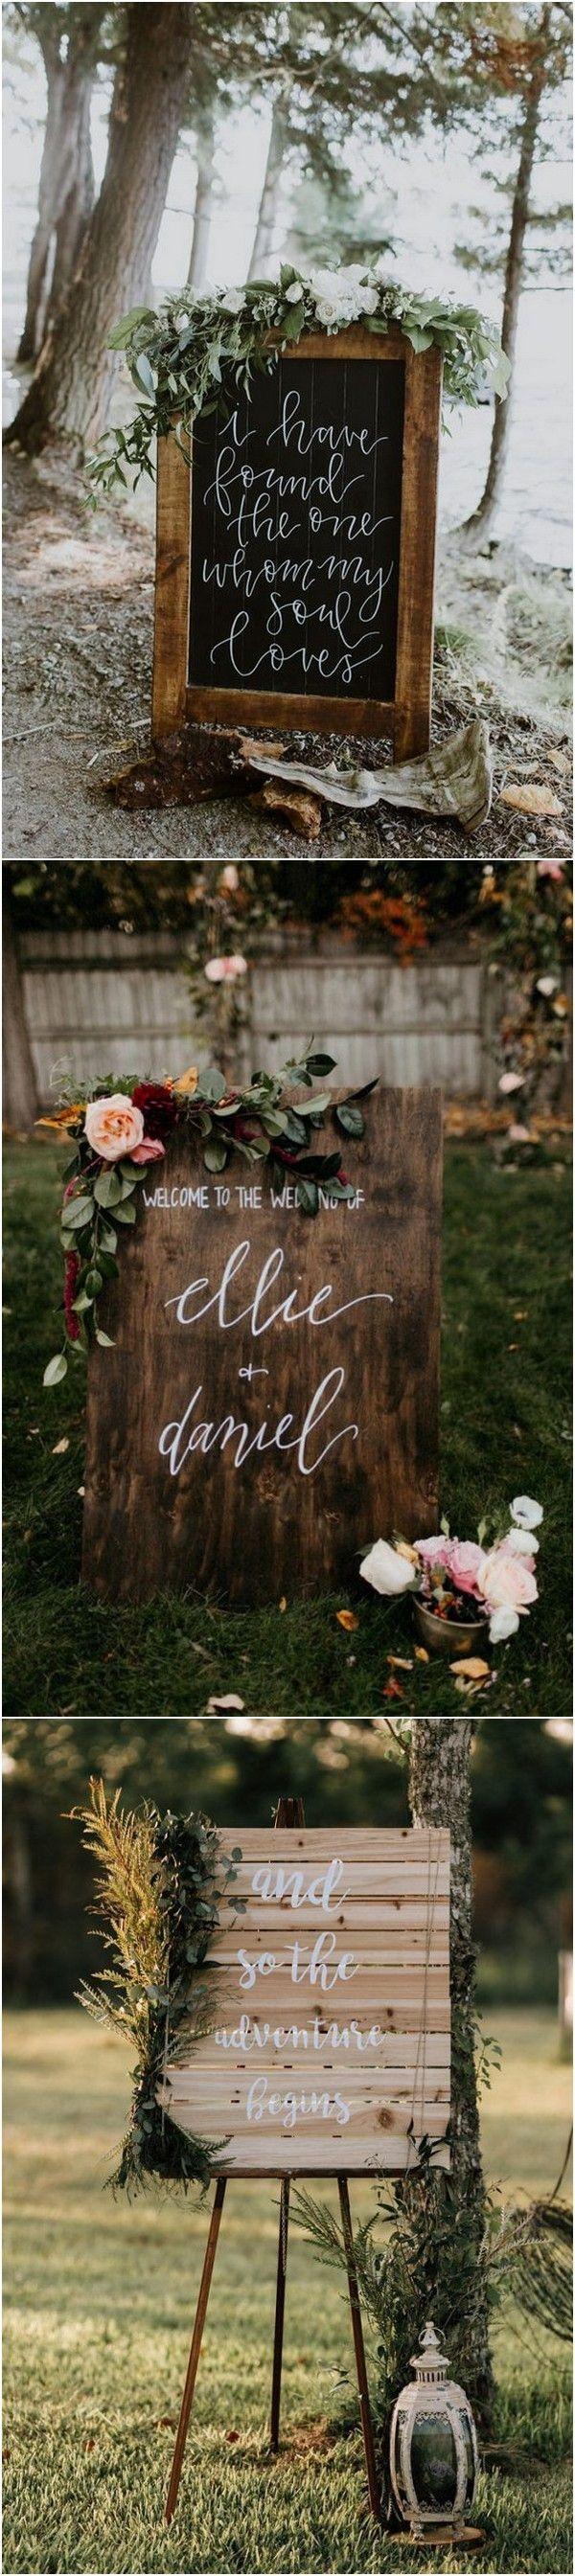 Mariage - 15 Chic Greenery Wedding Signs For 2018 Trends - Page 2 Of 2